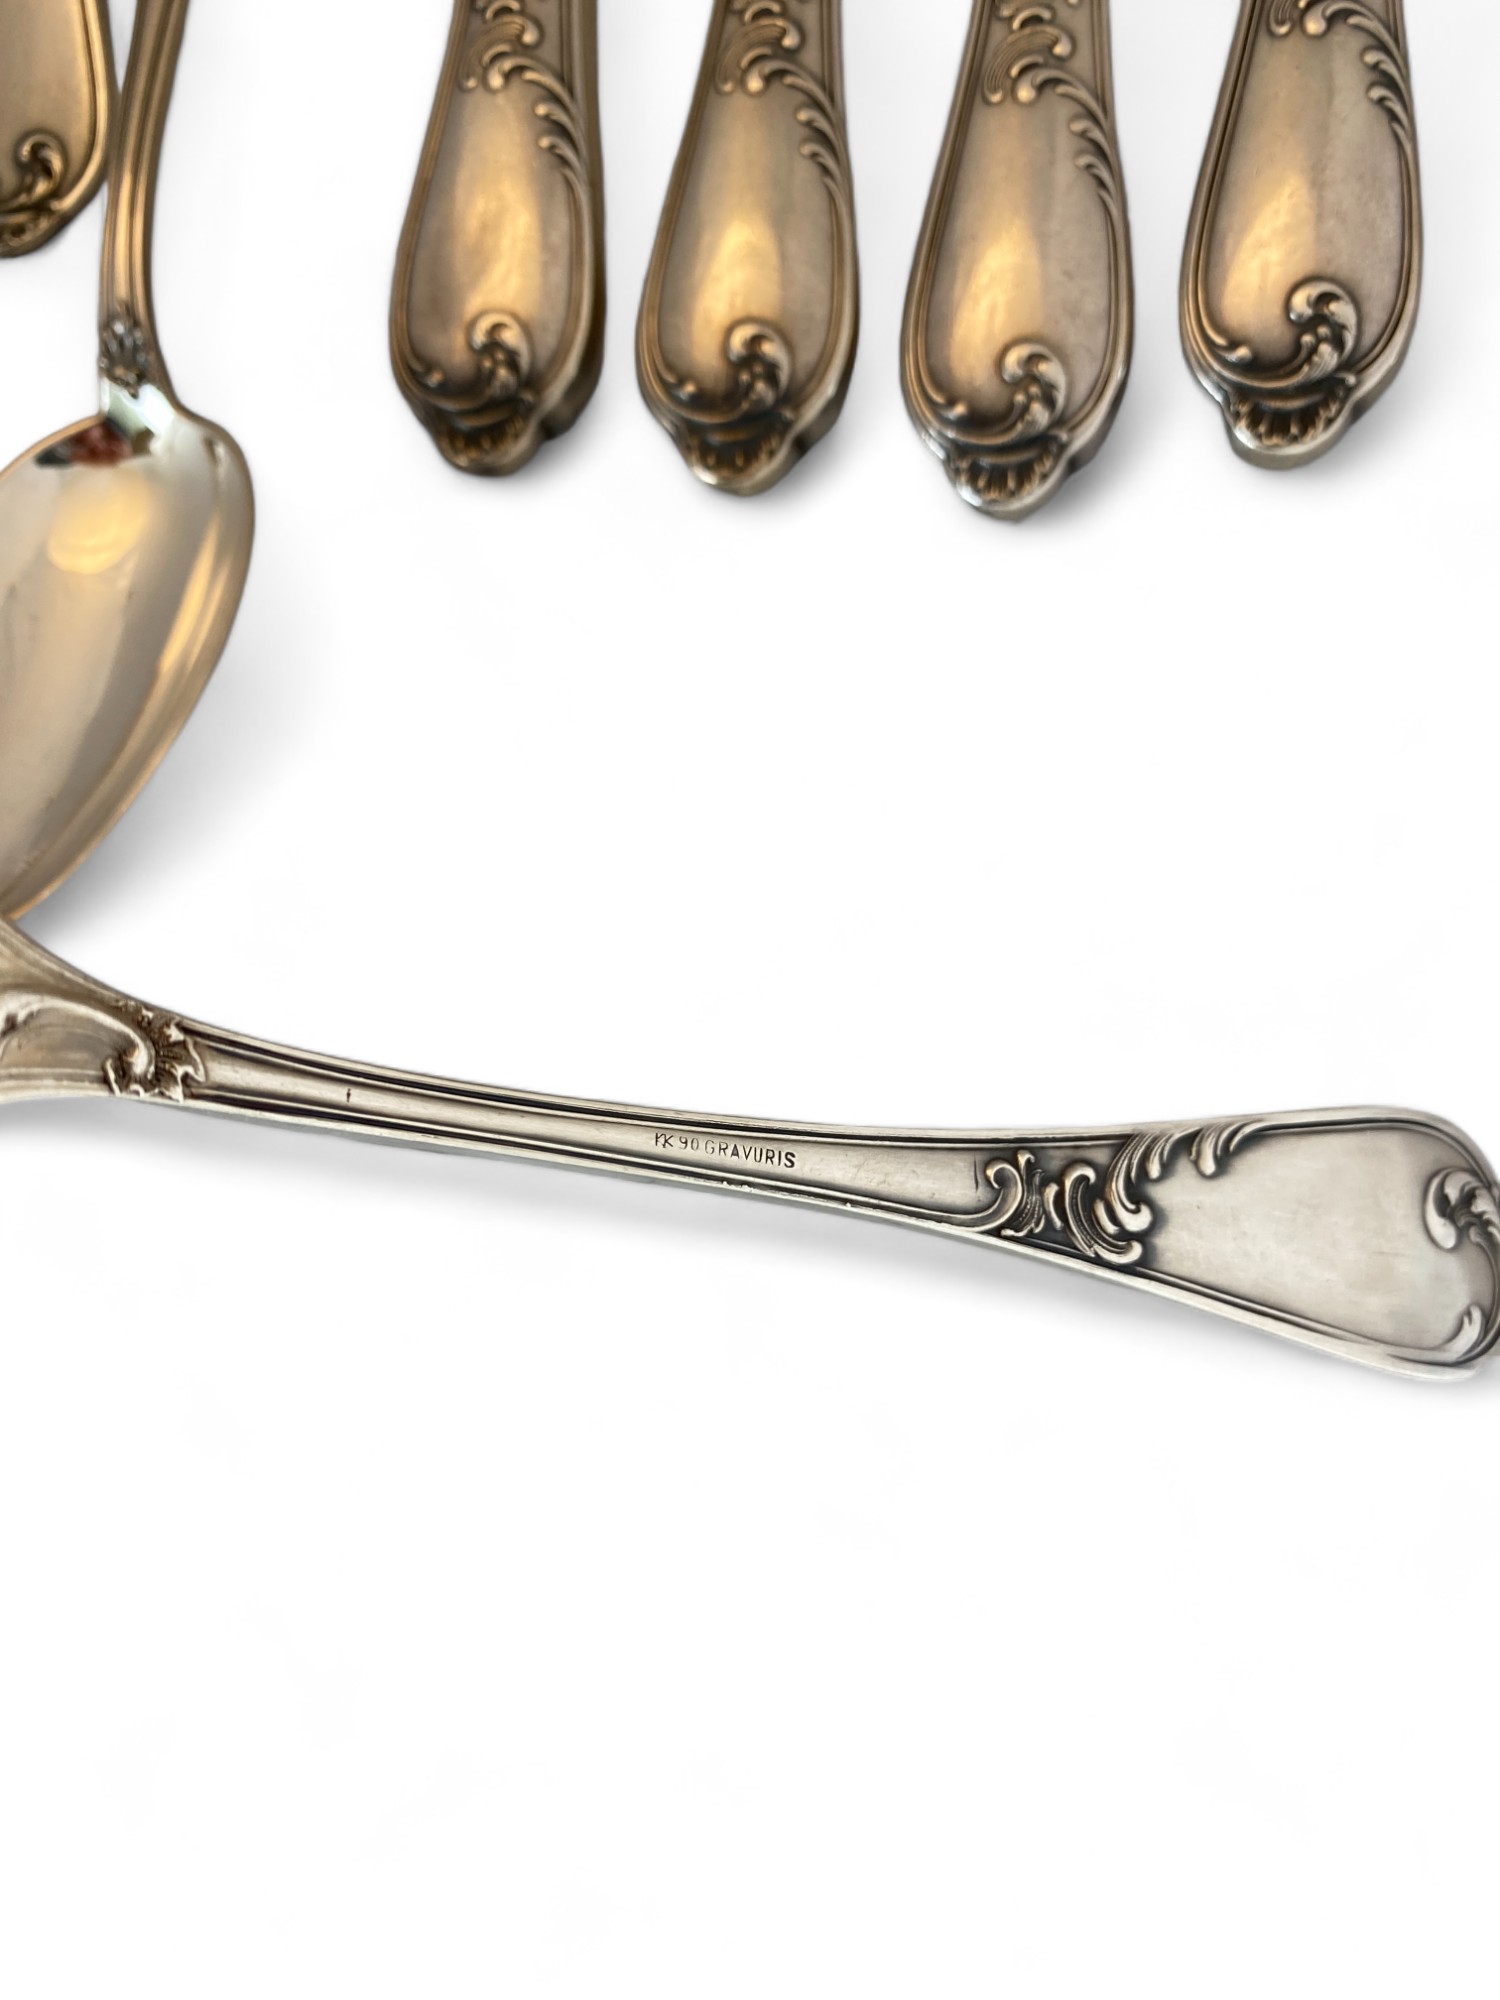 An extensive composite canteen of mostly silver plated Marly pattern cutlery by Christofle, Paris - Image 7 of 99